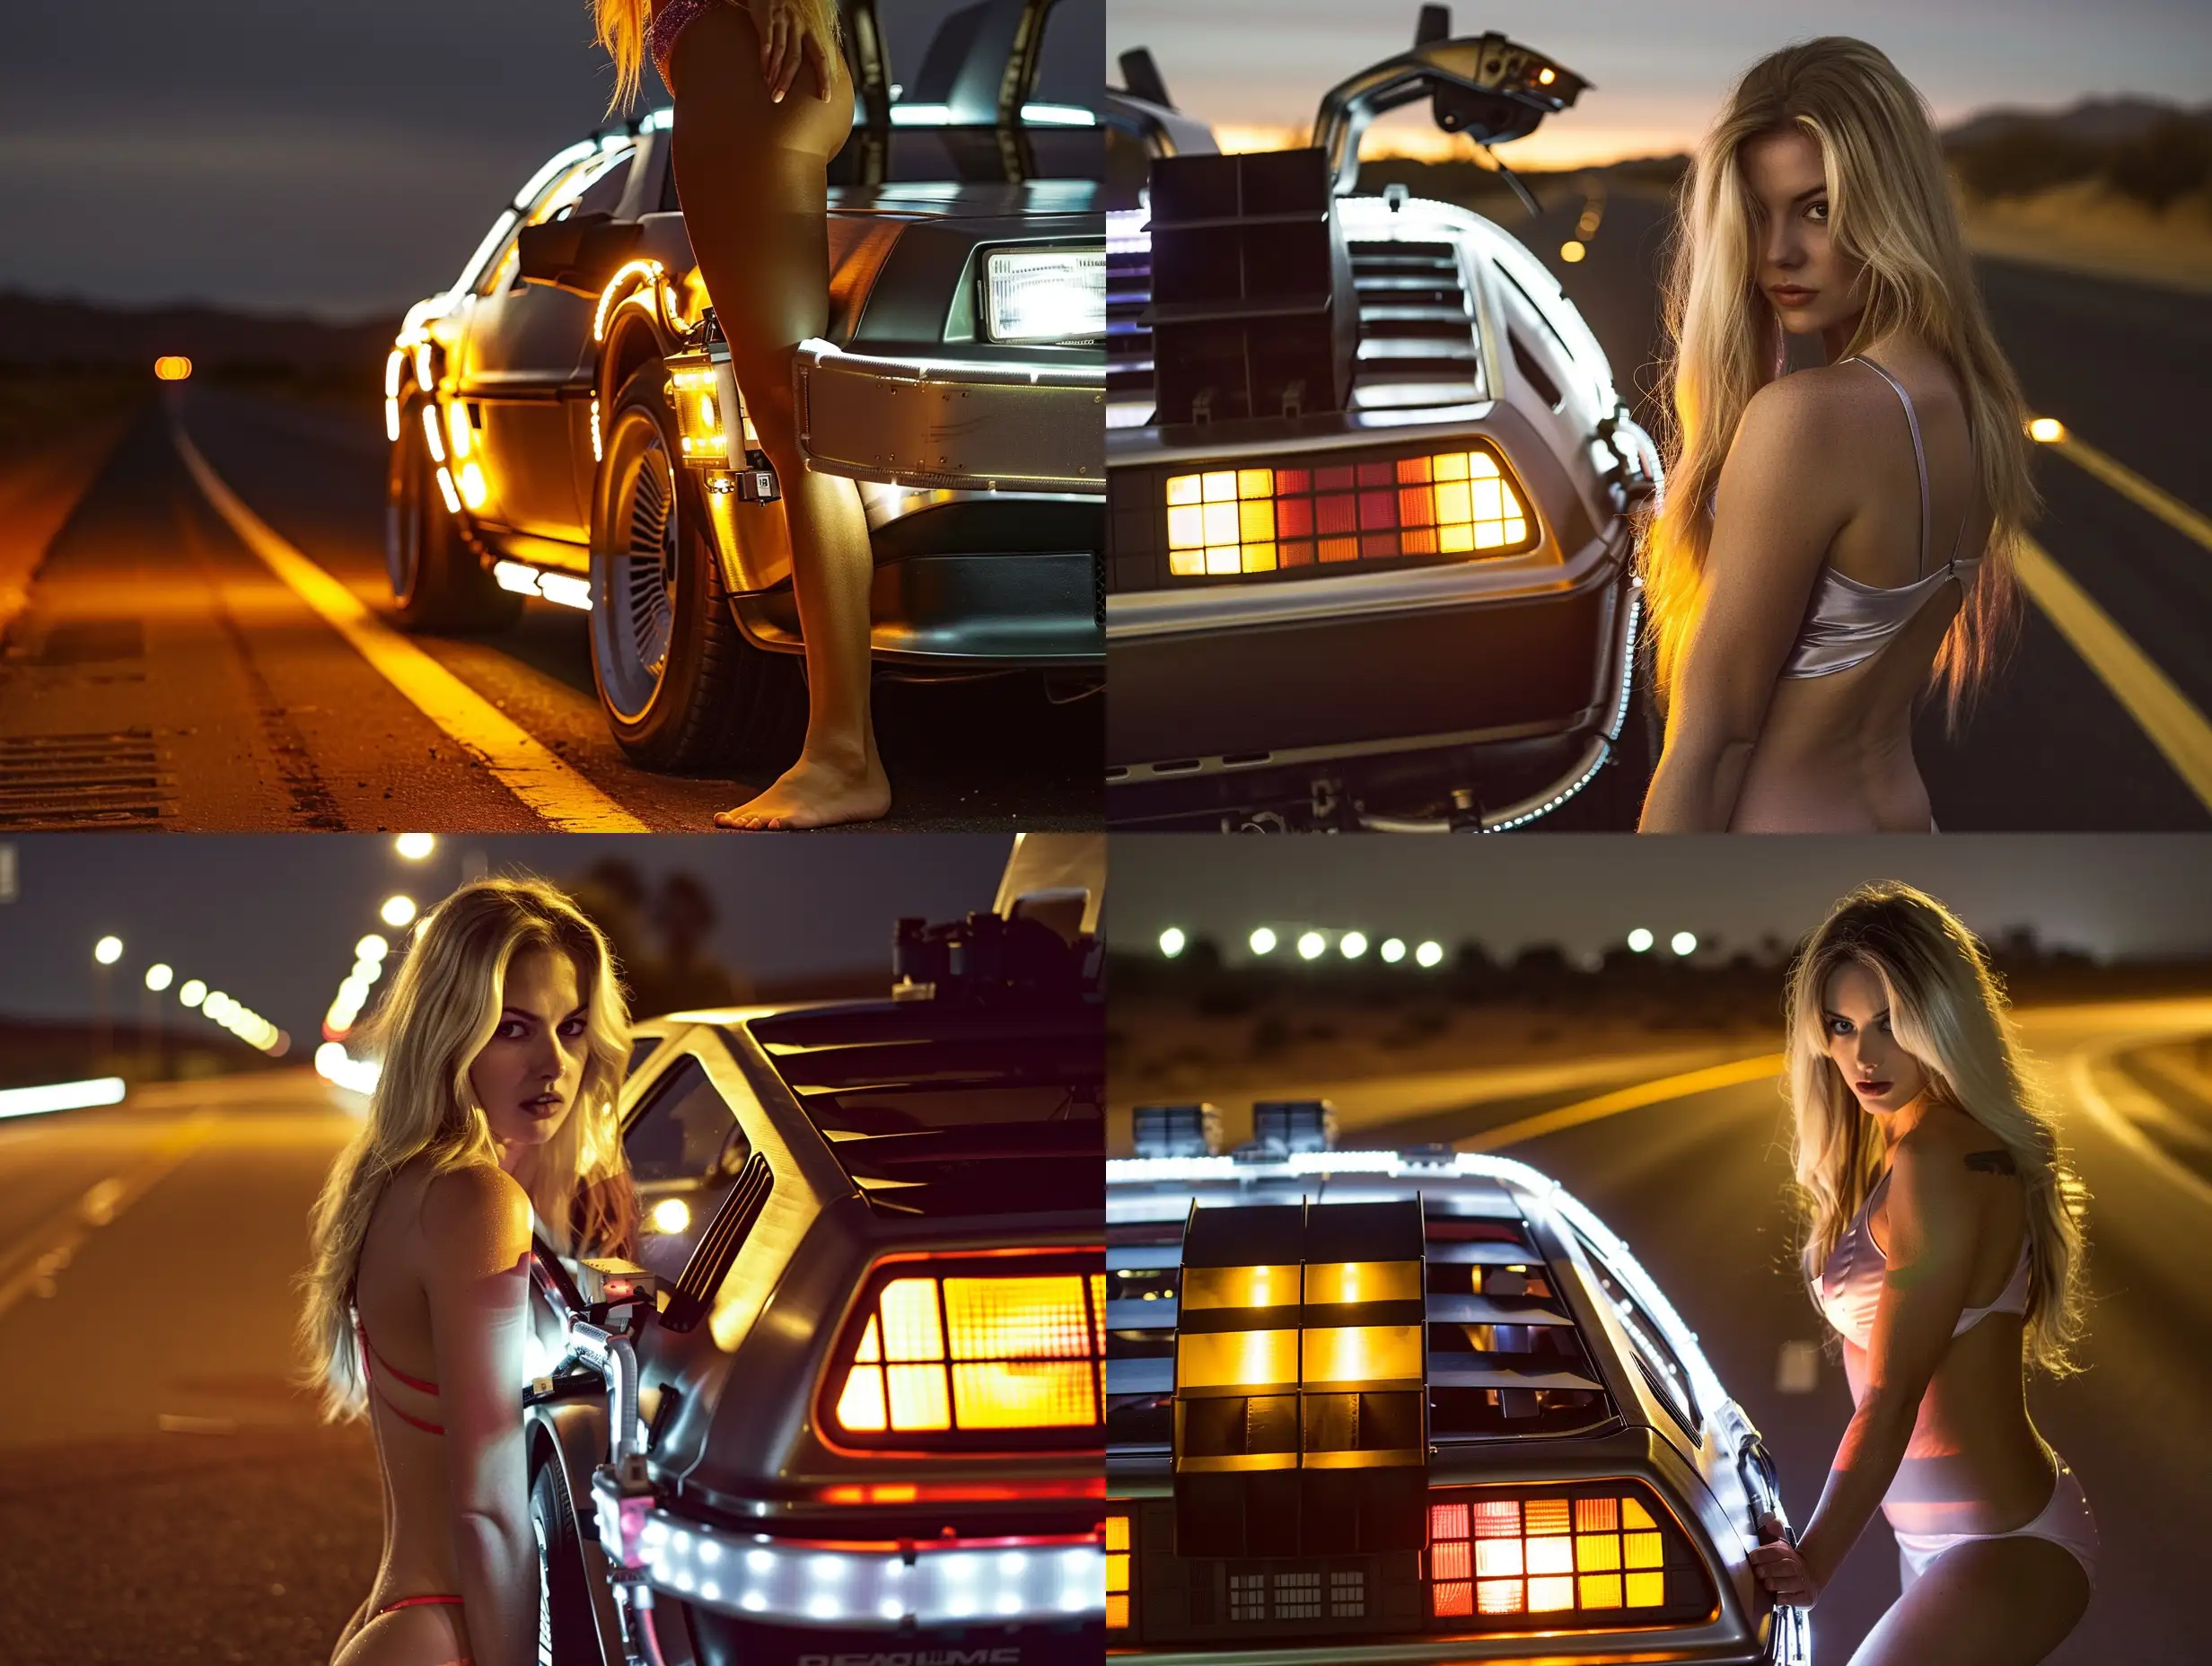 Blonde-Woman-in-Swimsuit-Leaning-on-Lit-Up-Back-to-the-Future-Delorean-at-Night